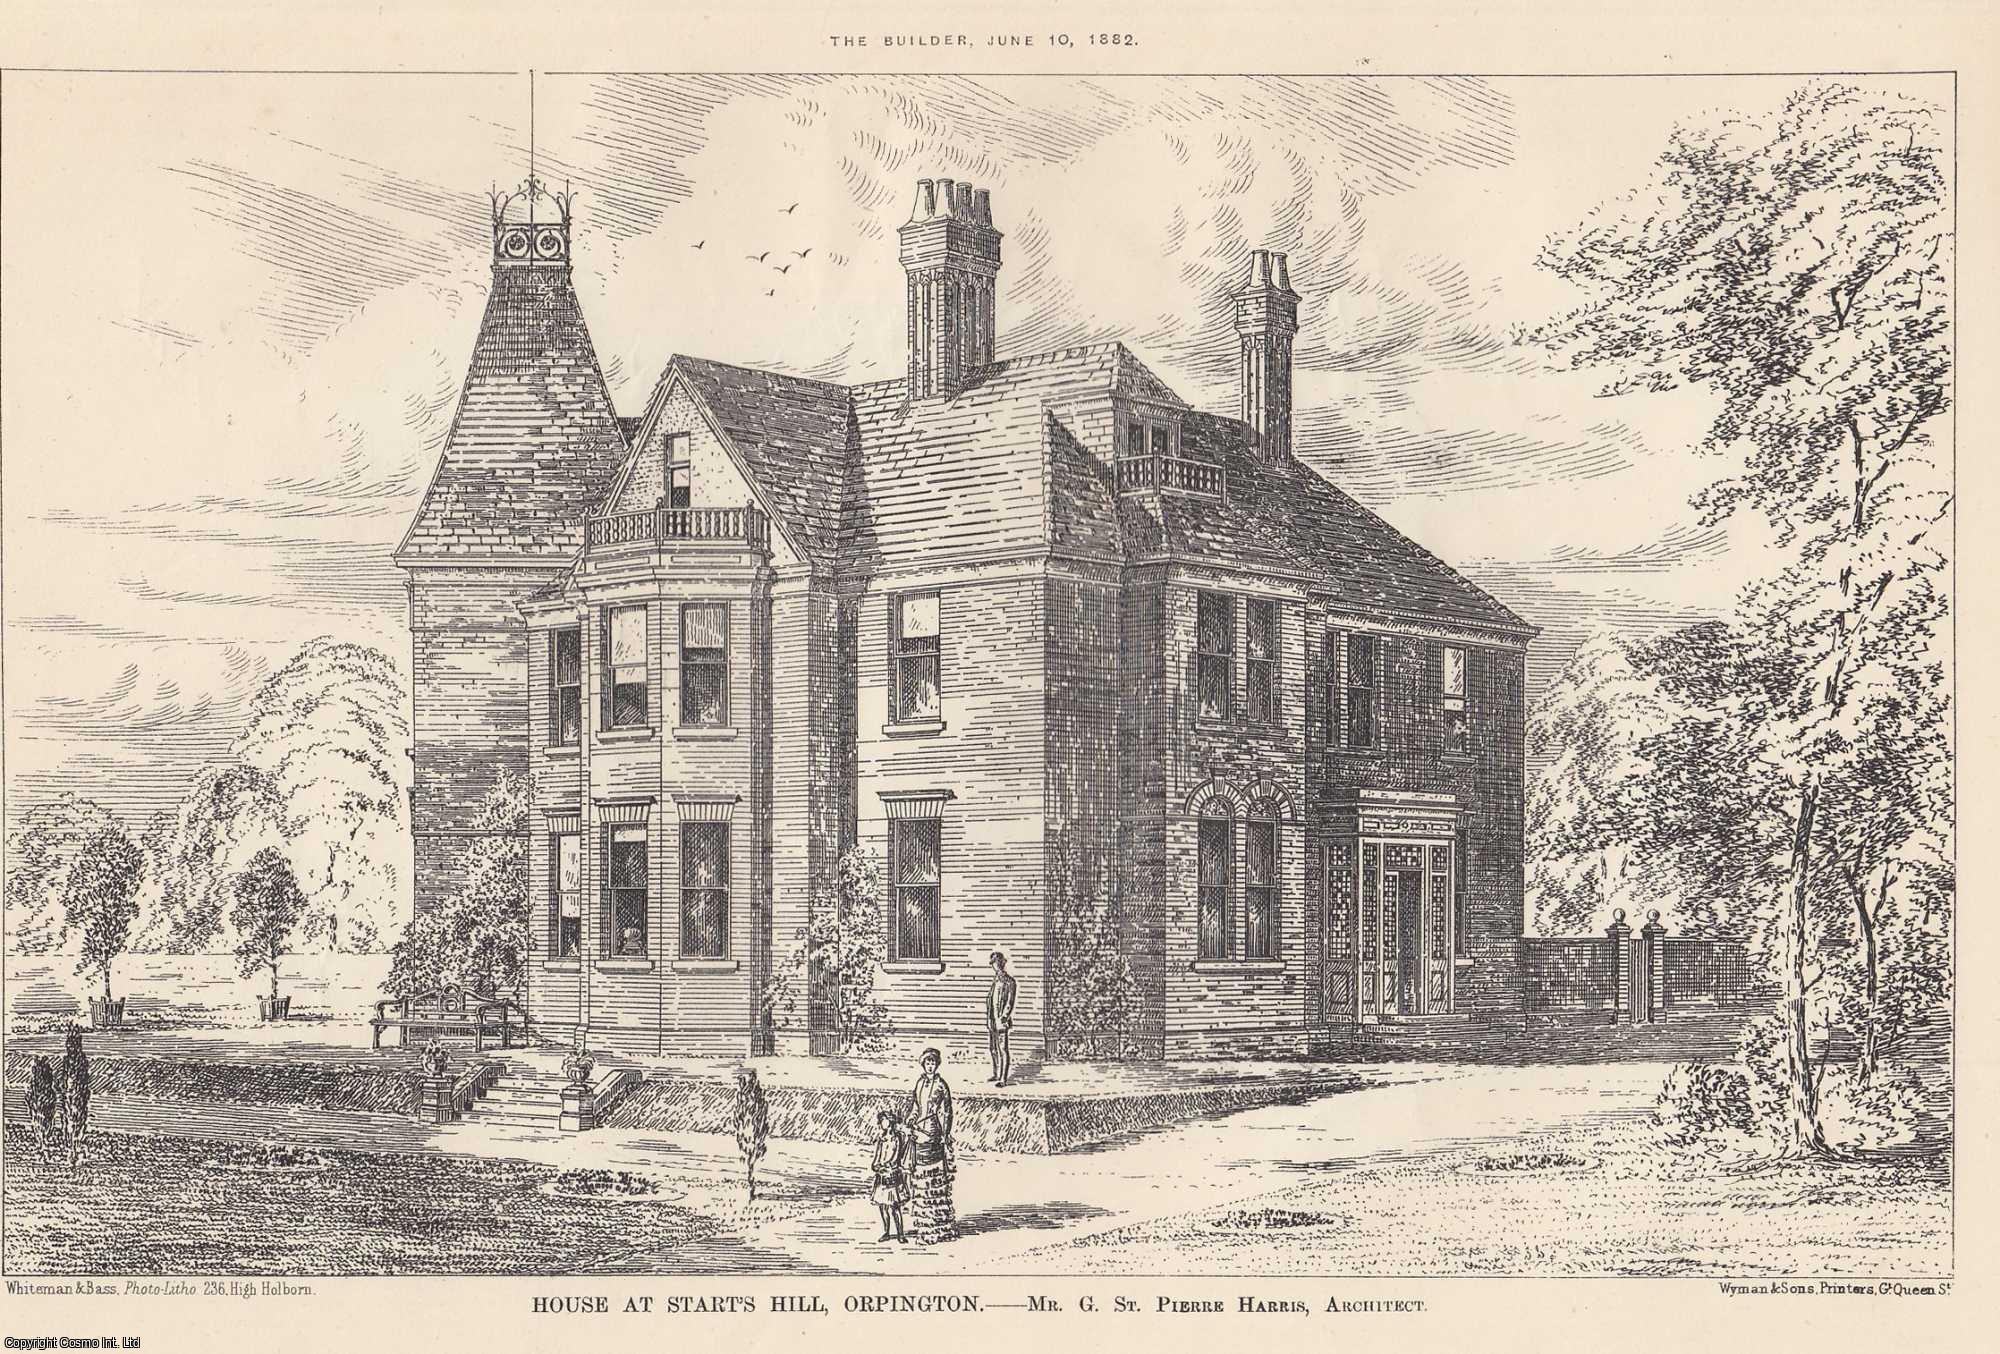 HOUSE, ORPINGTON - 1882 : House at Start's Hill, Orpington. G. St. Pierre Harris, Architect. An original page from The Builder. An Illustrated Weekly Magazine, for the Architect, Engineer, Archaeologist, Constructor, & Art-Lover.